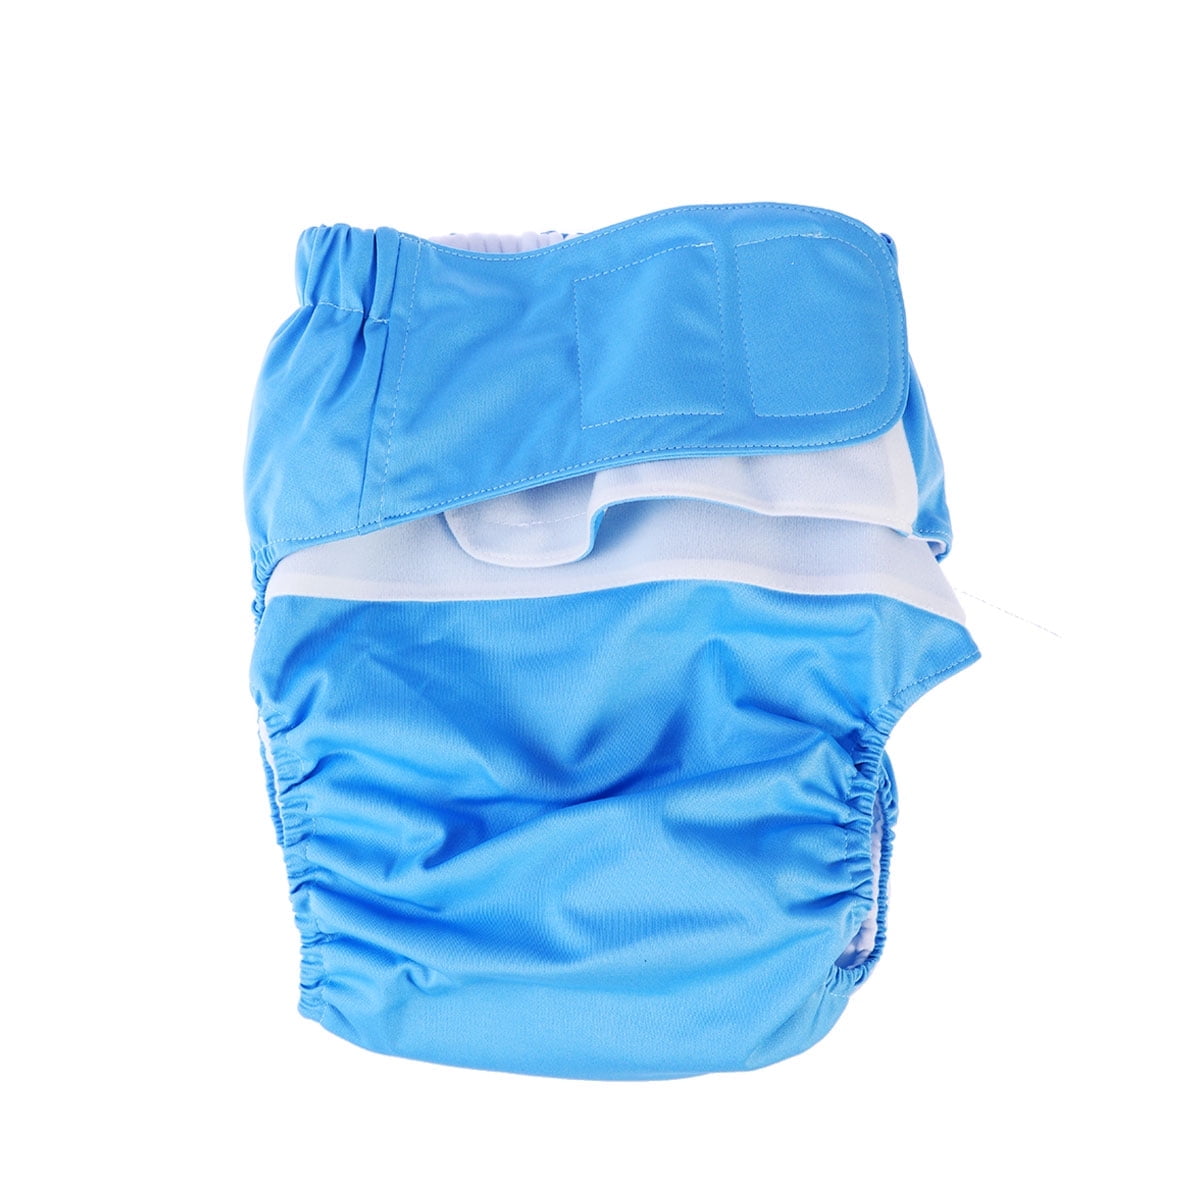 Diaper Briefs Incontinence Elderly Care Urinary Underwear Adult Travel  Breathable Diapers Adults Cloth Men Use Cotton